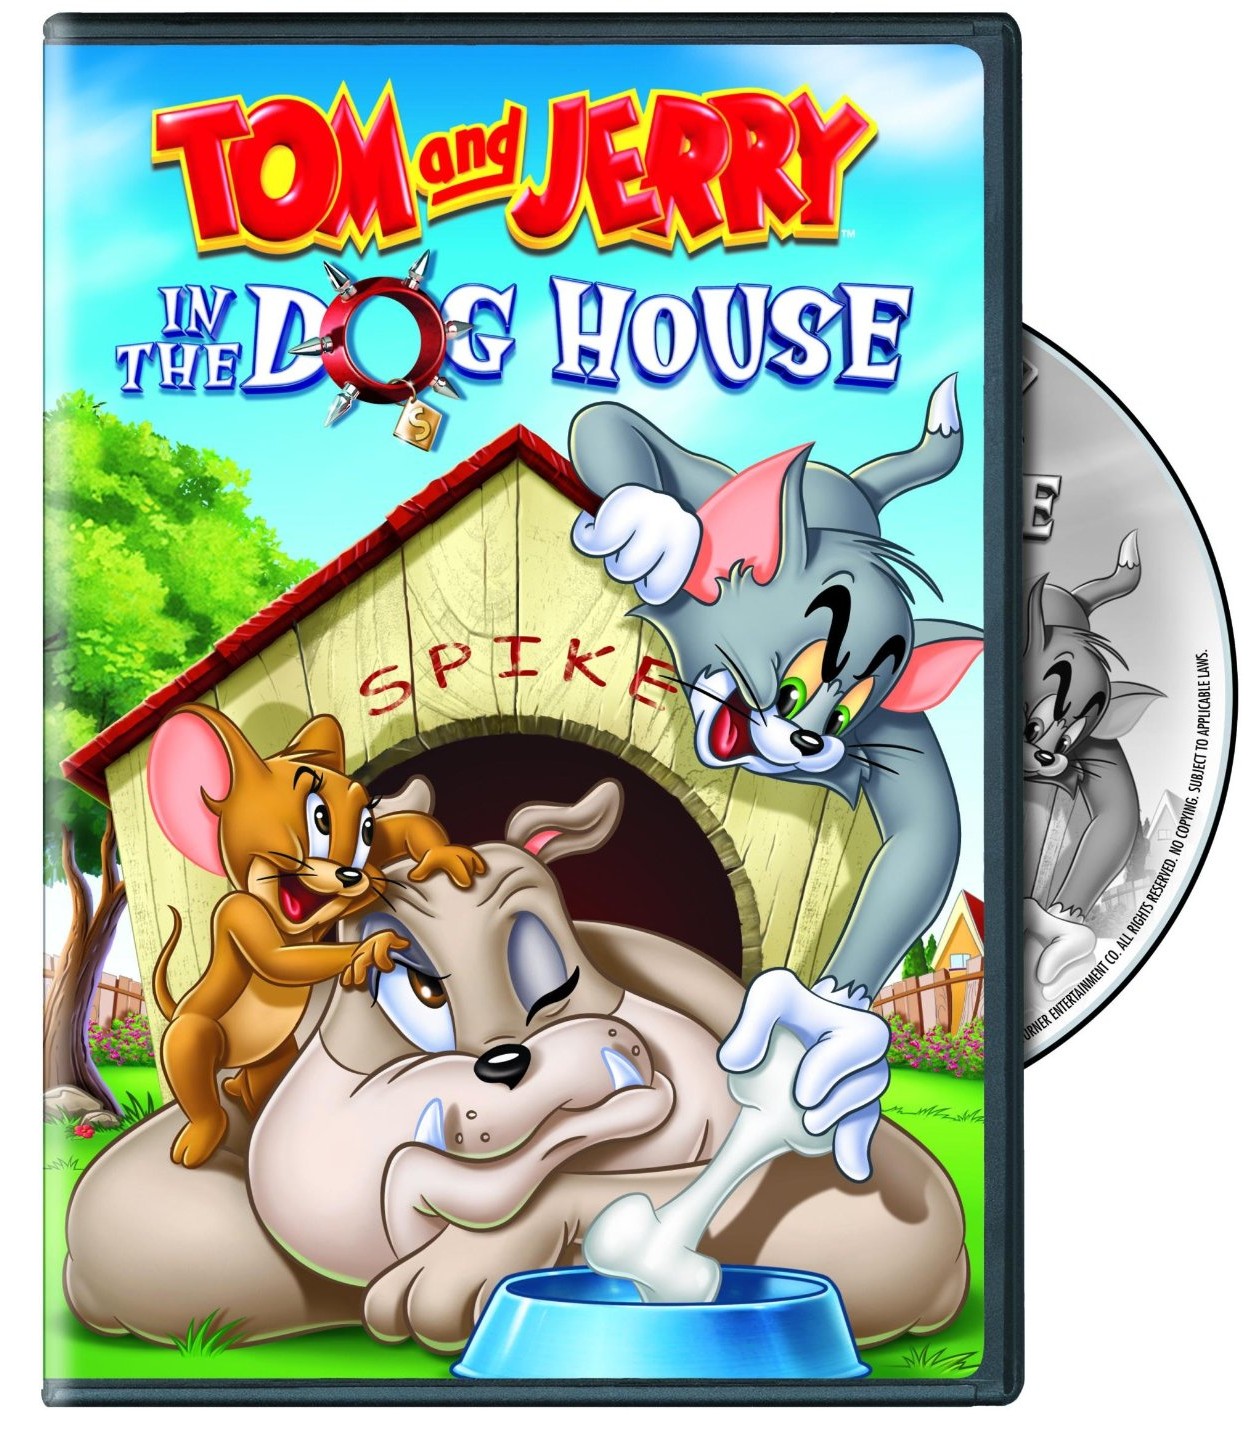 Win Tom and Jerry on DVD